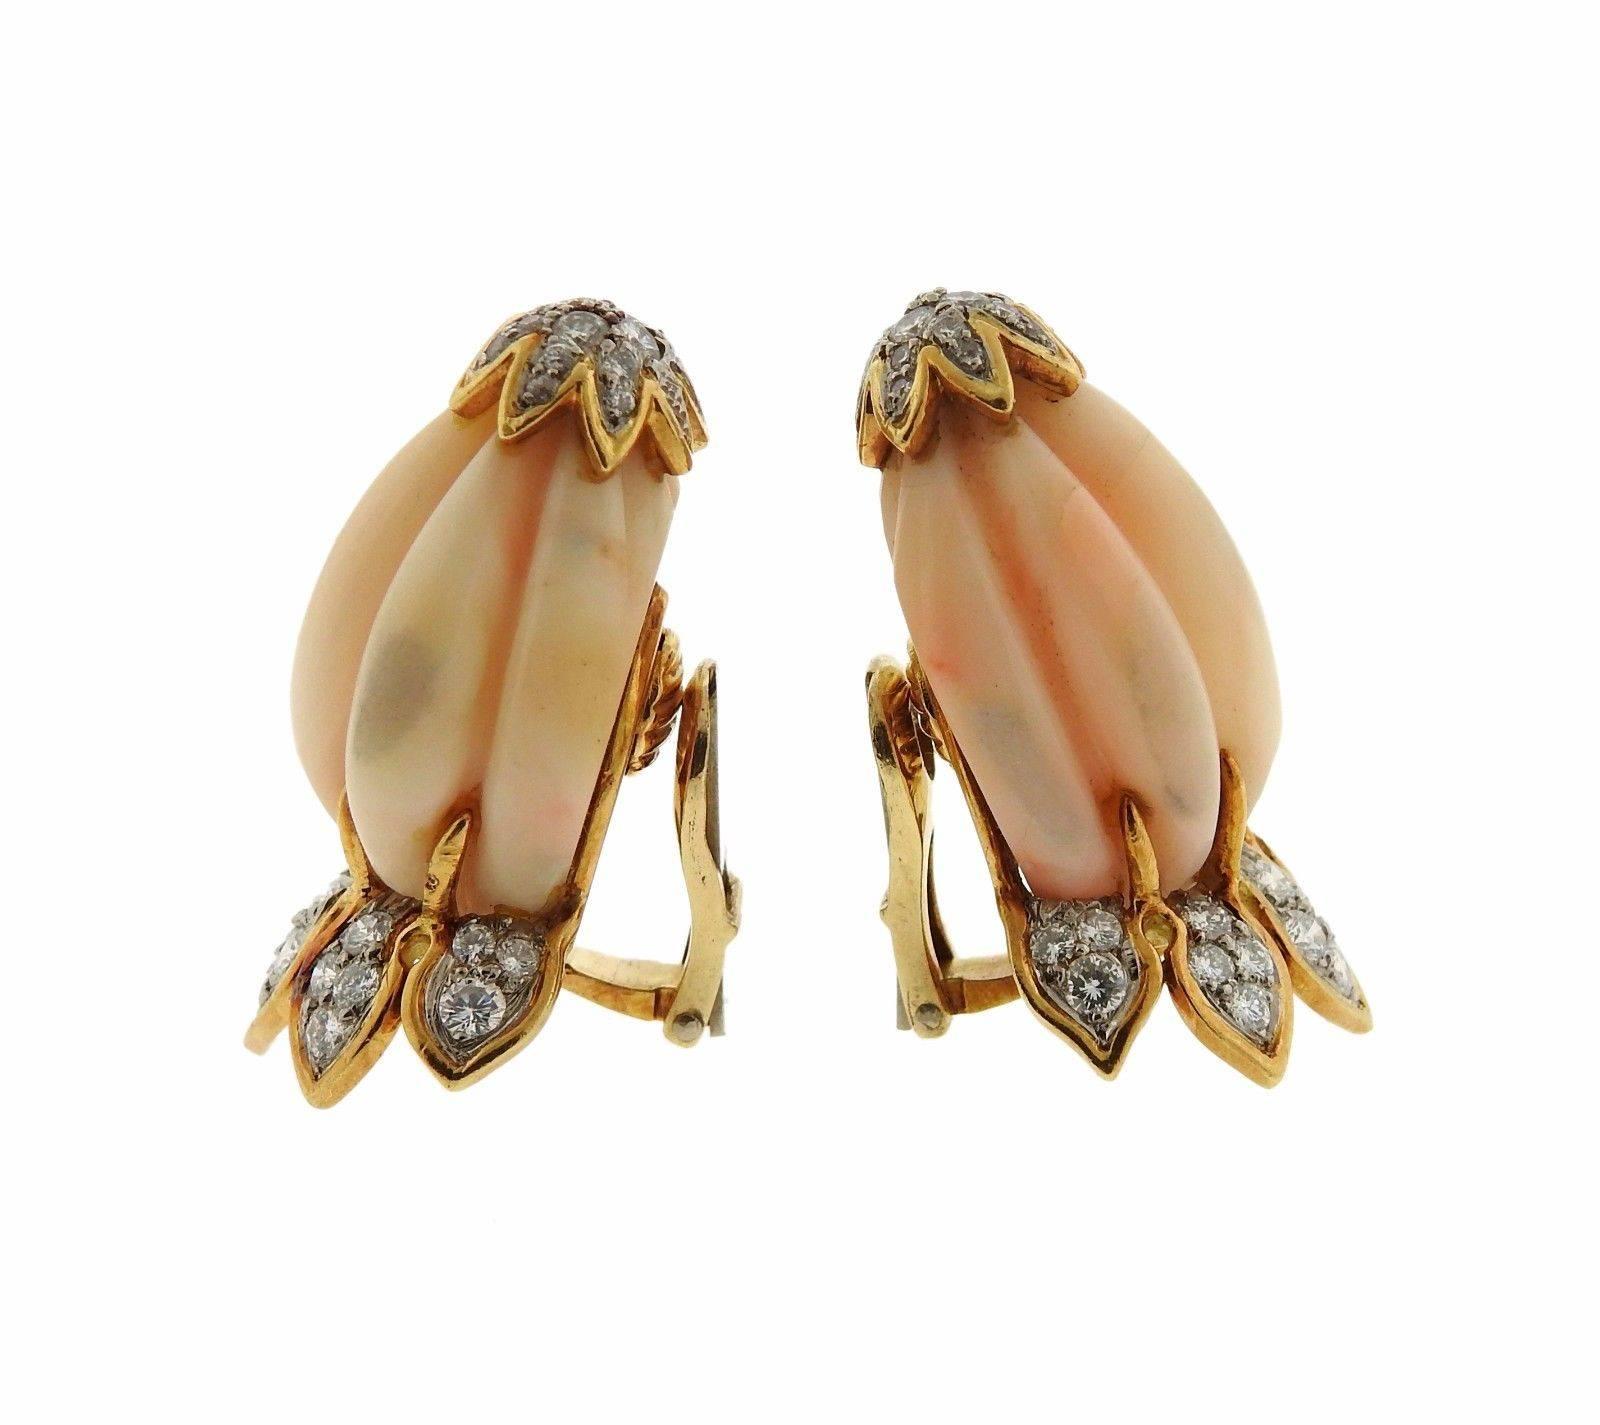 A pair of 18k yellow gold earrings set with carved coral and approximately 2 carats of G-H/VS diamonds.  The earrings measure 36mm x 23mm and weigh 34.2 grams.